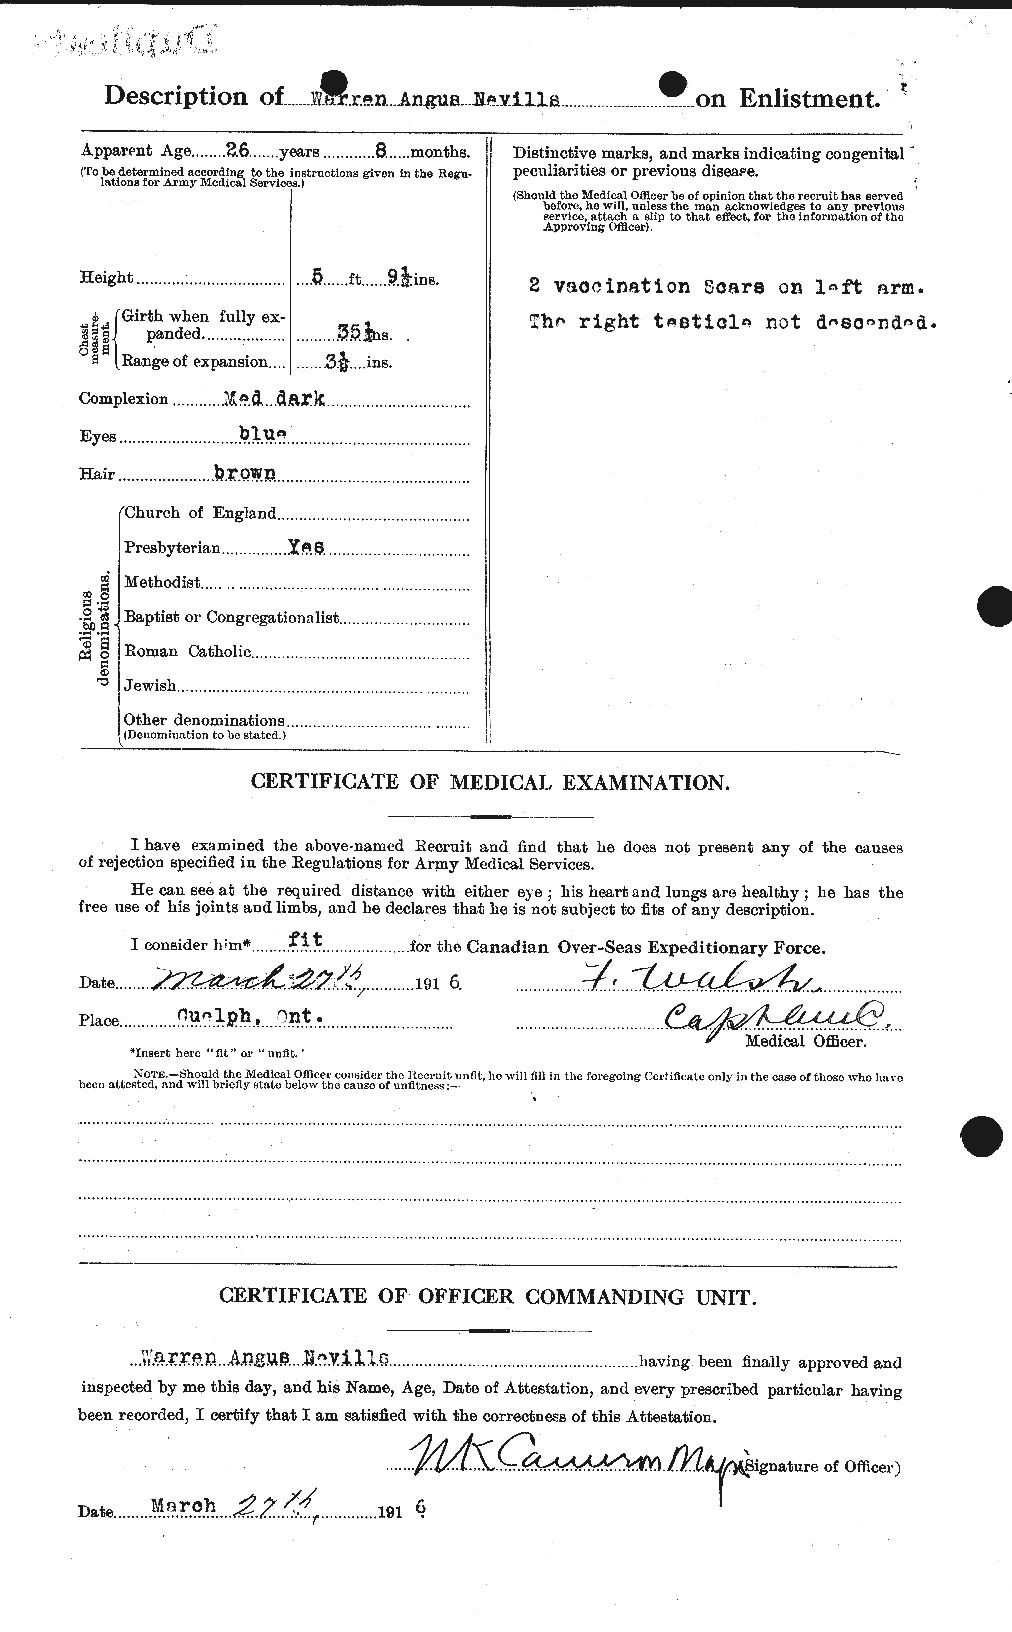 Personnel Records of the First World War - CEF 550431b